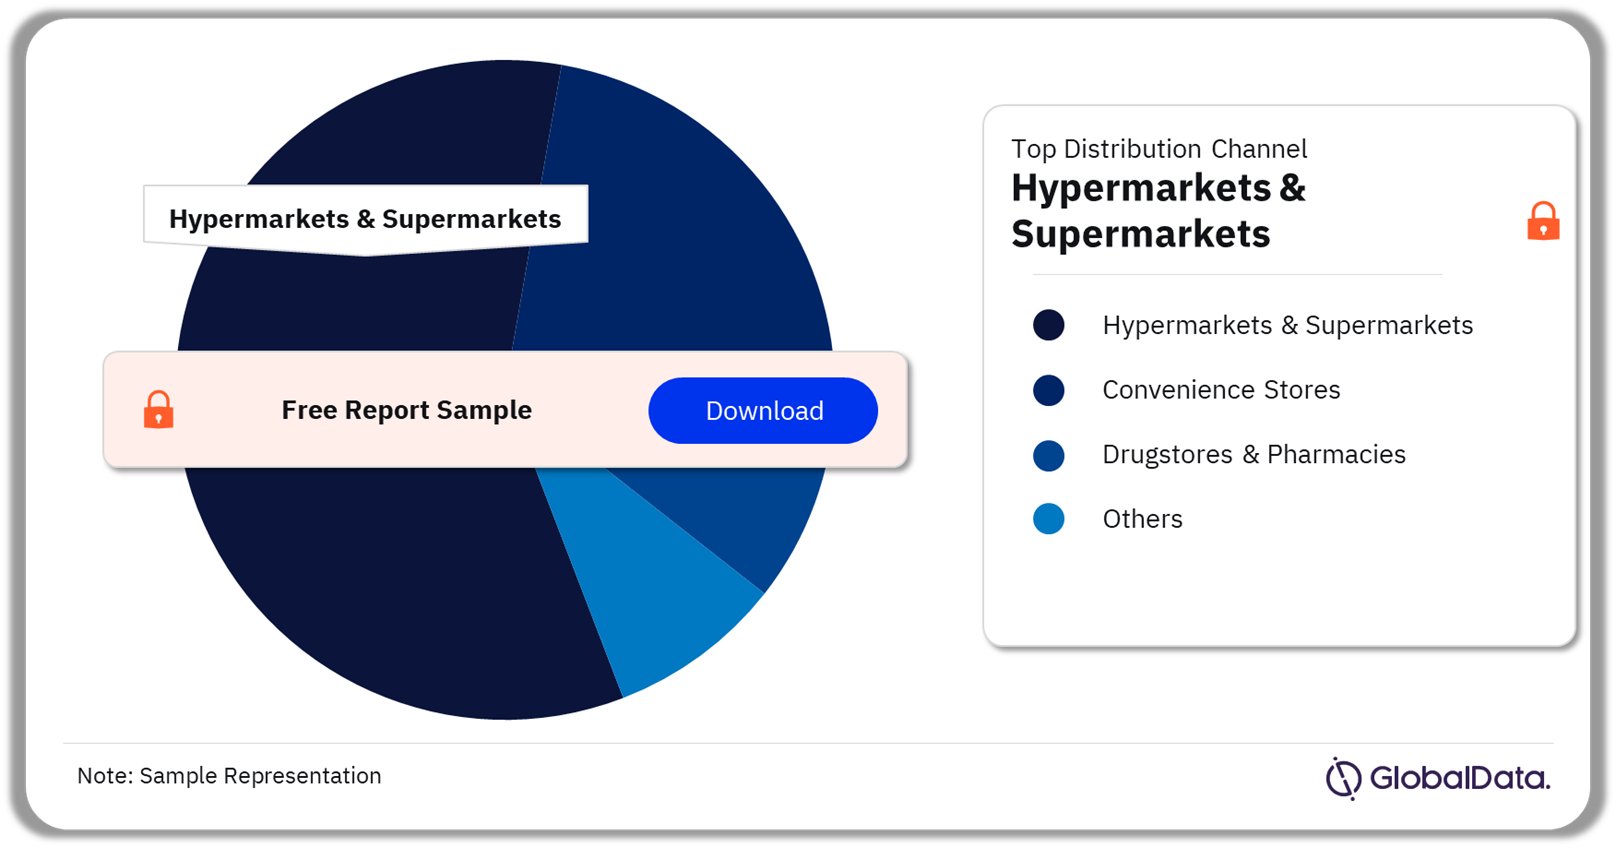 Hypermarkets & supermarkets was the dominant distribution channel with the highest baby food sales in 2022